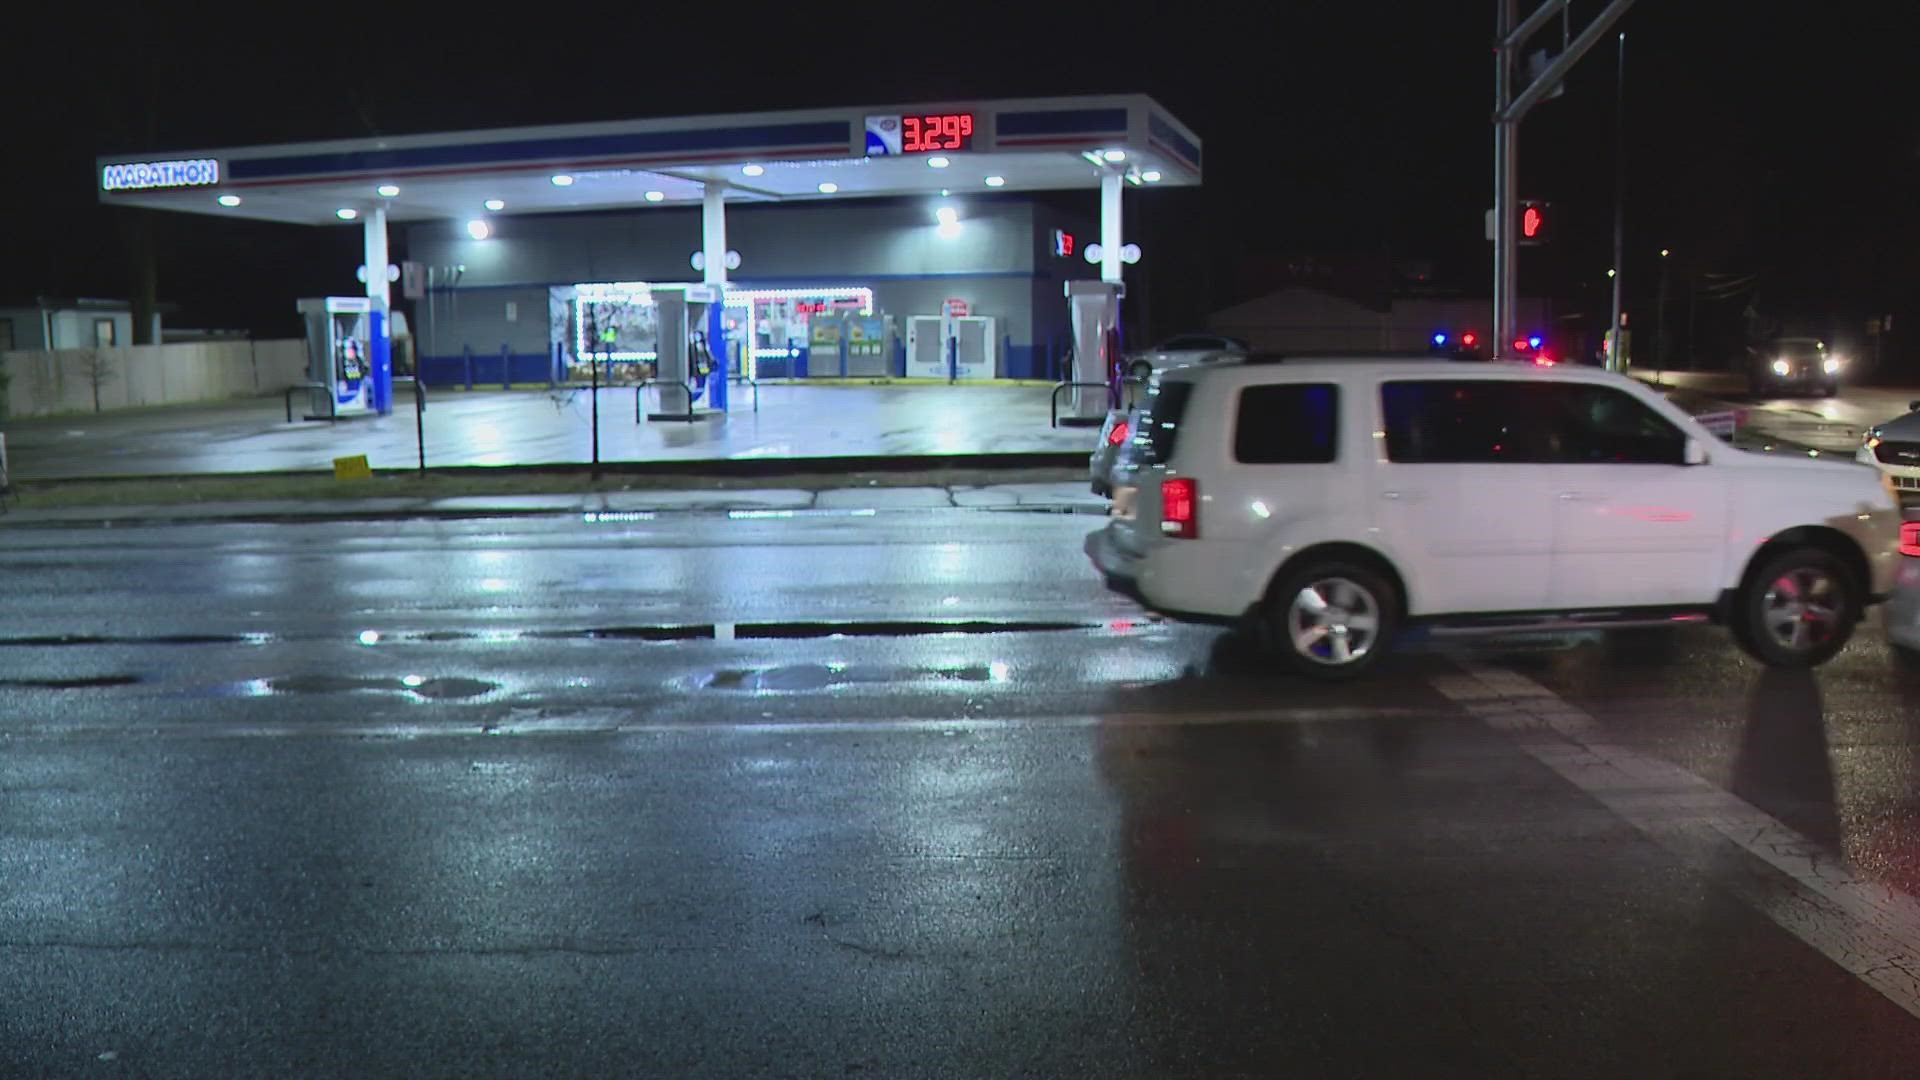 Police believe it happened at a west side gas station.